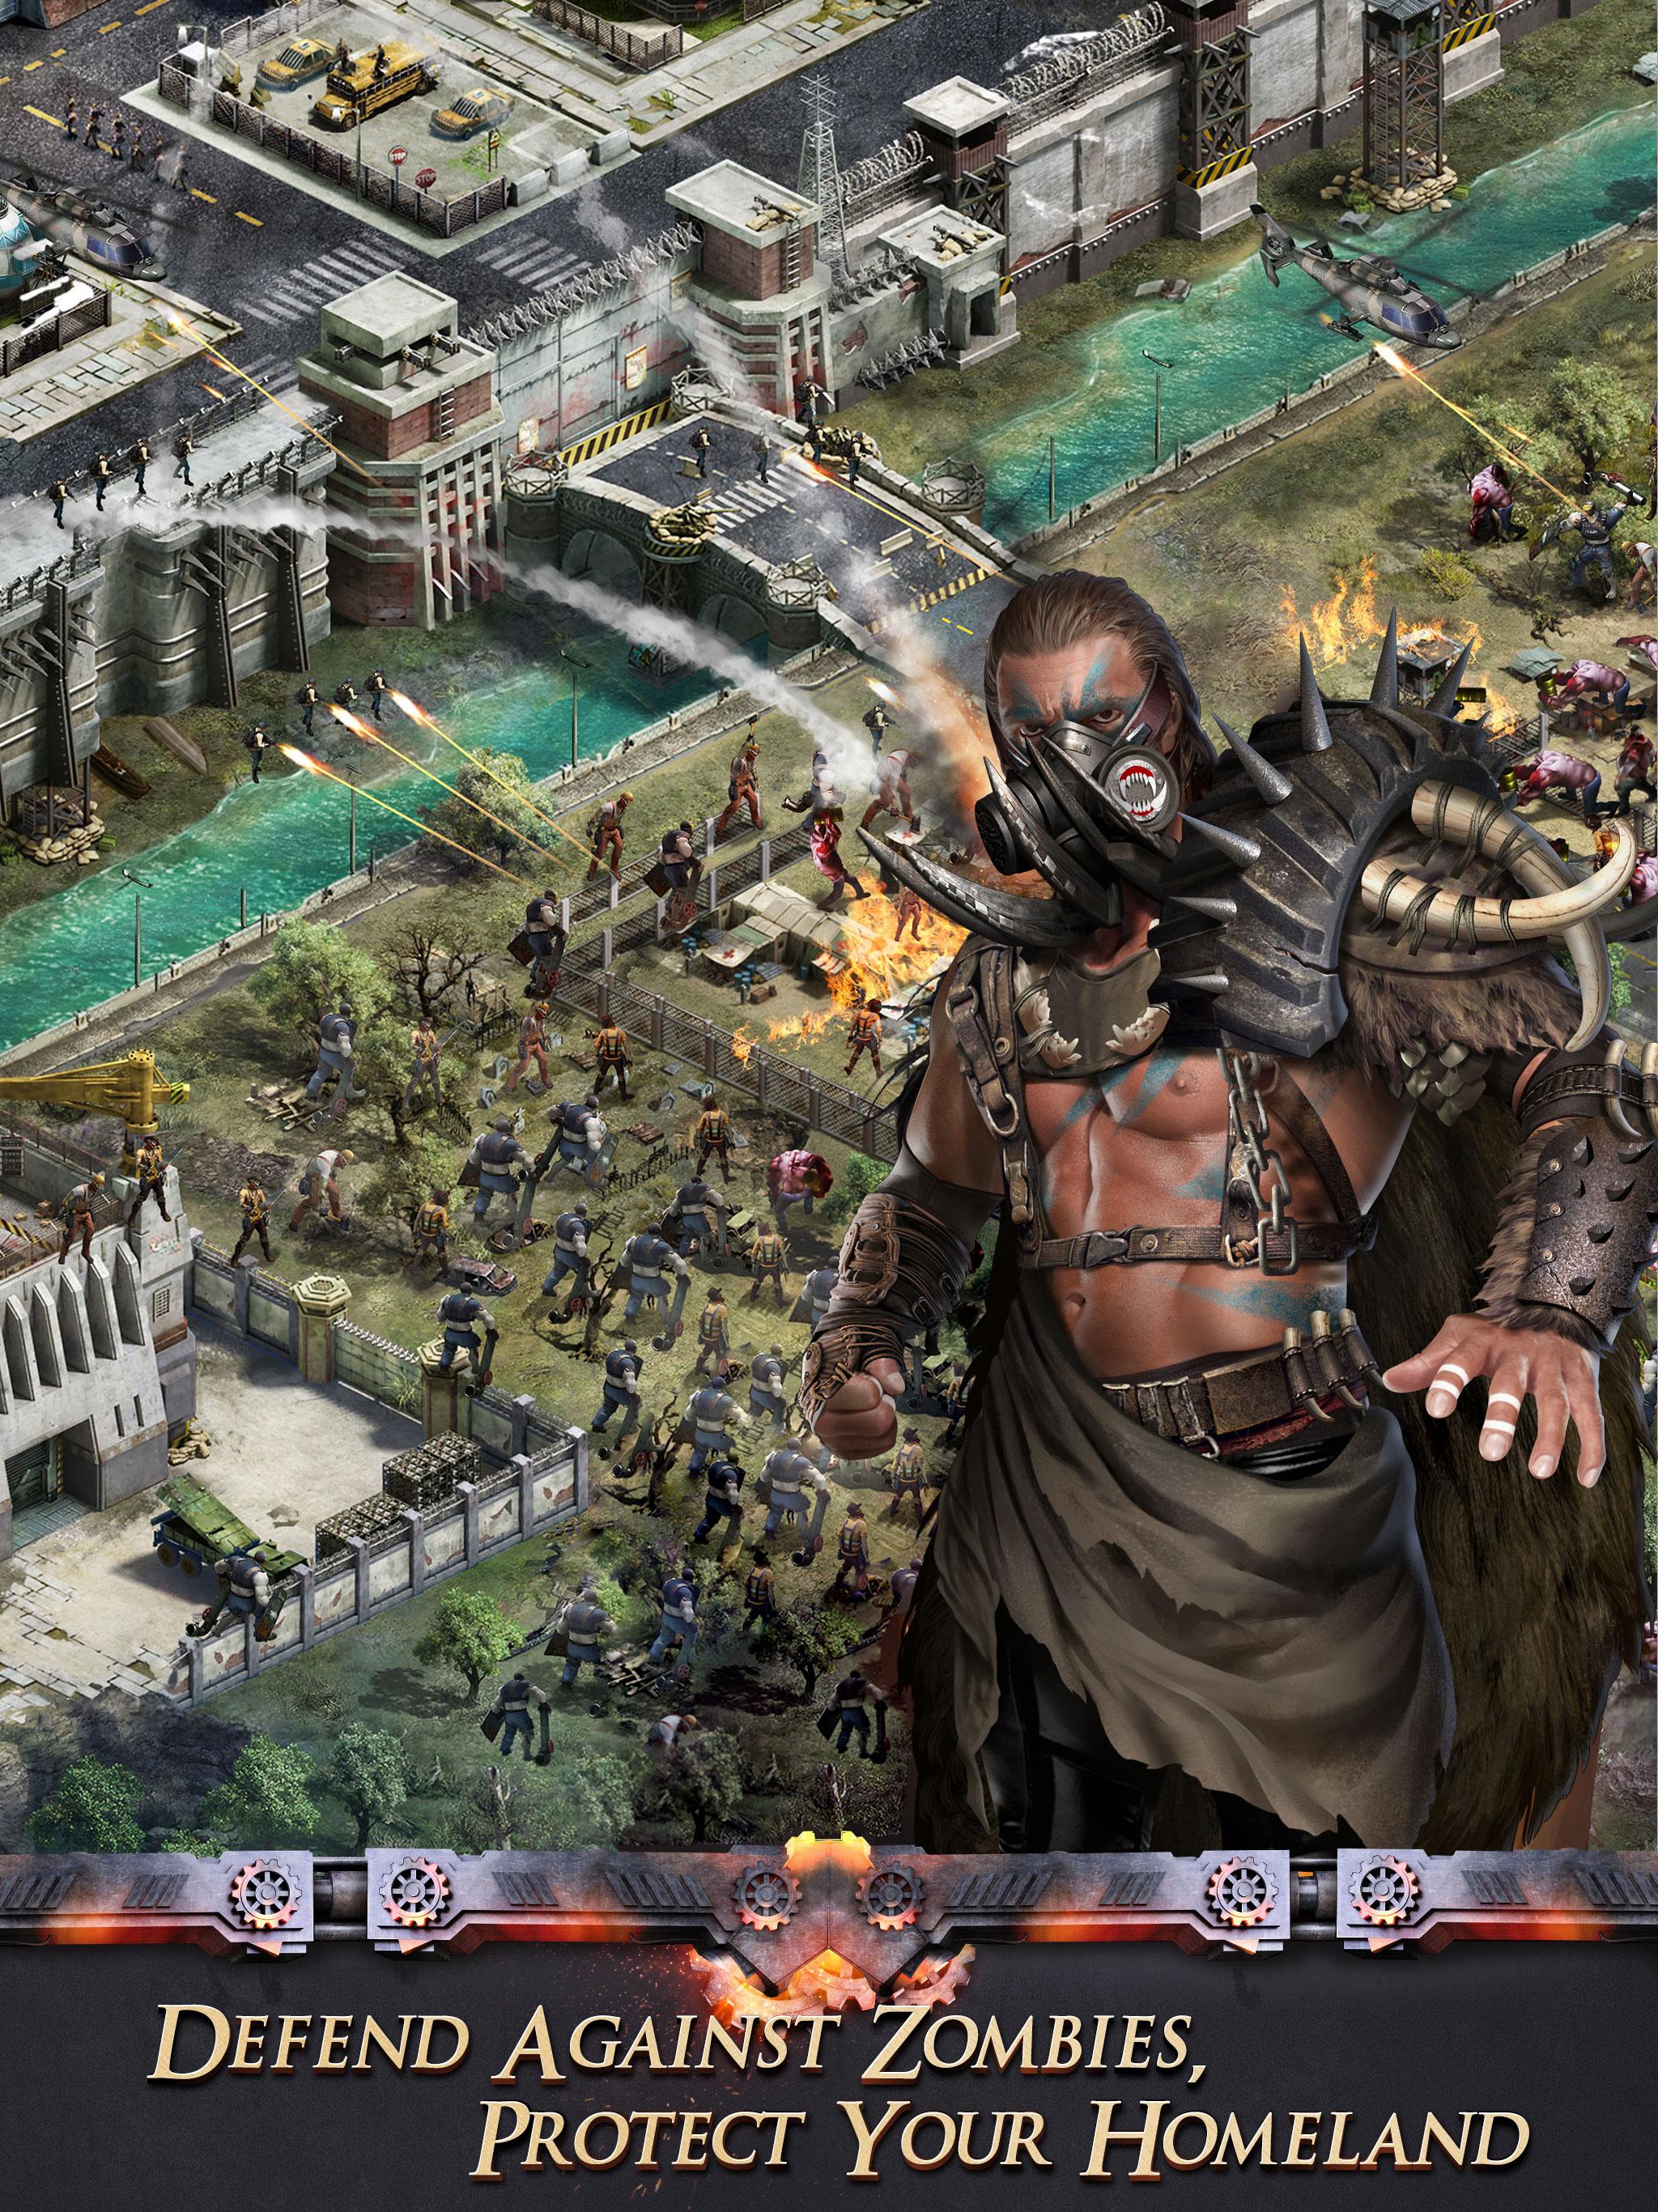 Last Empire-War Z APK - Download Free Android Strategy Game - APKPure